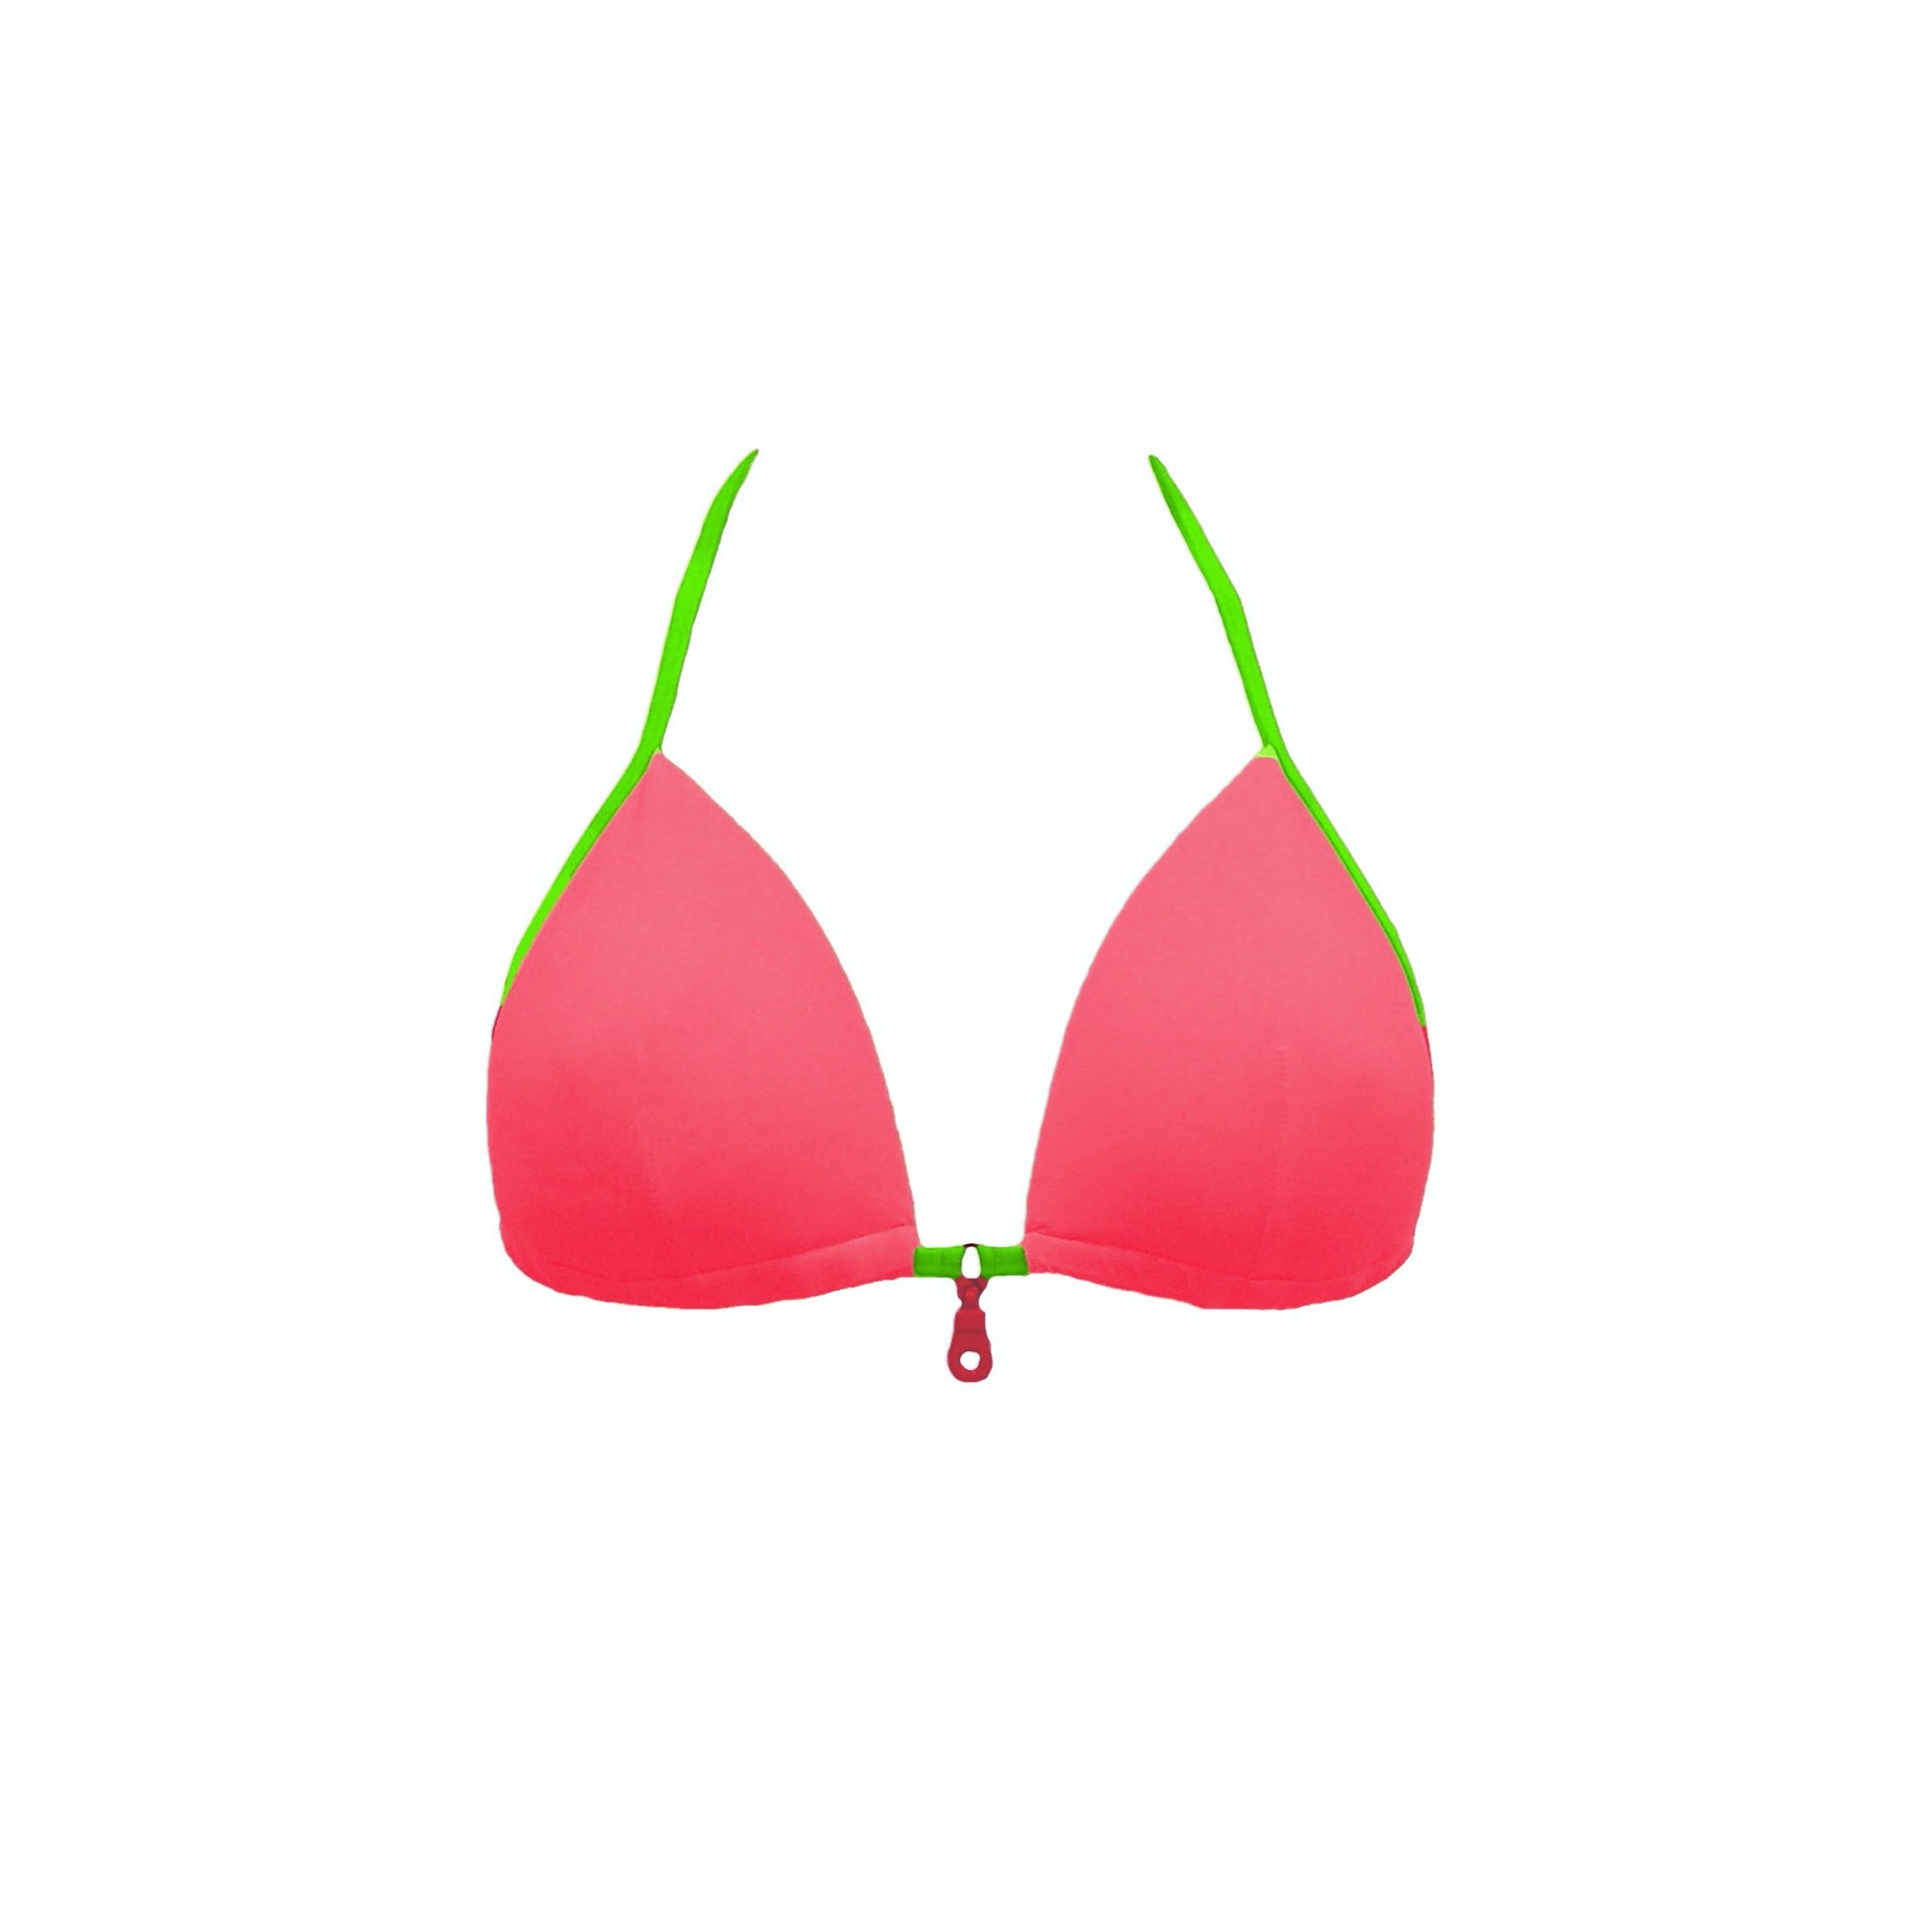 Totally adjustable pink bikini set with push-up bra and bottom. Green straps and zipper detail. Really comfortable for pool or beach. This bikini will never upset you, it will alway be one of your favorites. Parte superior bikini rosa. Parte superior bikini de lazos.